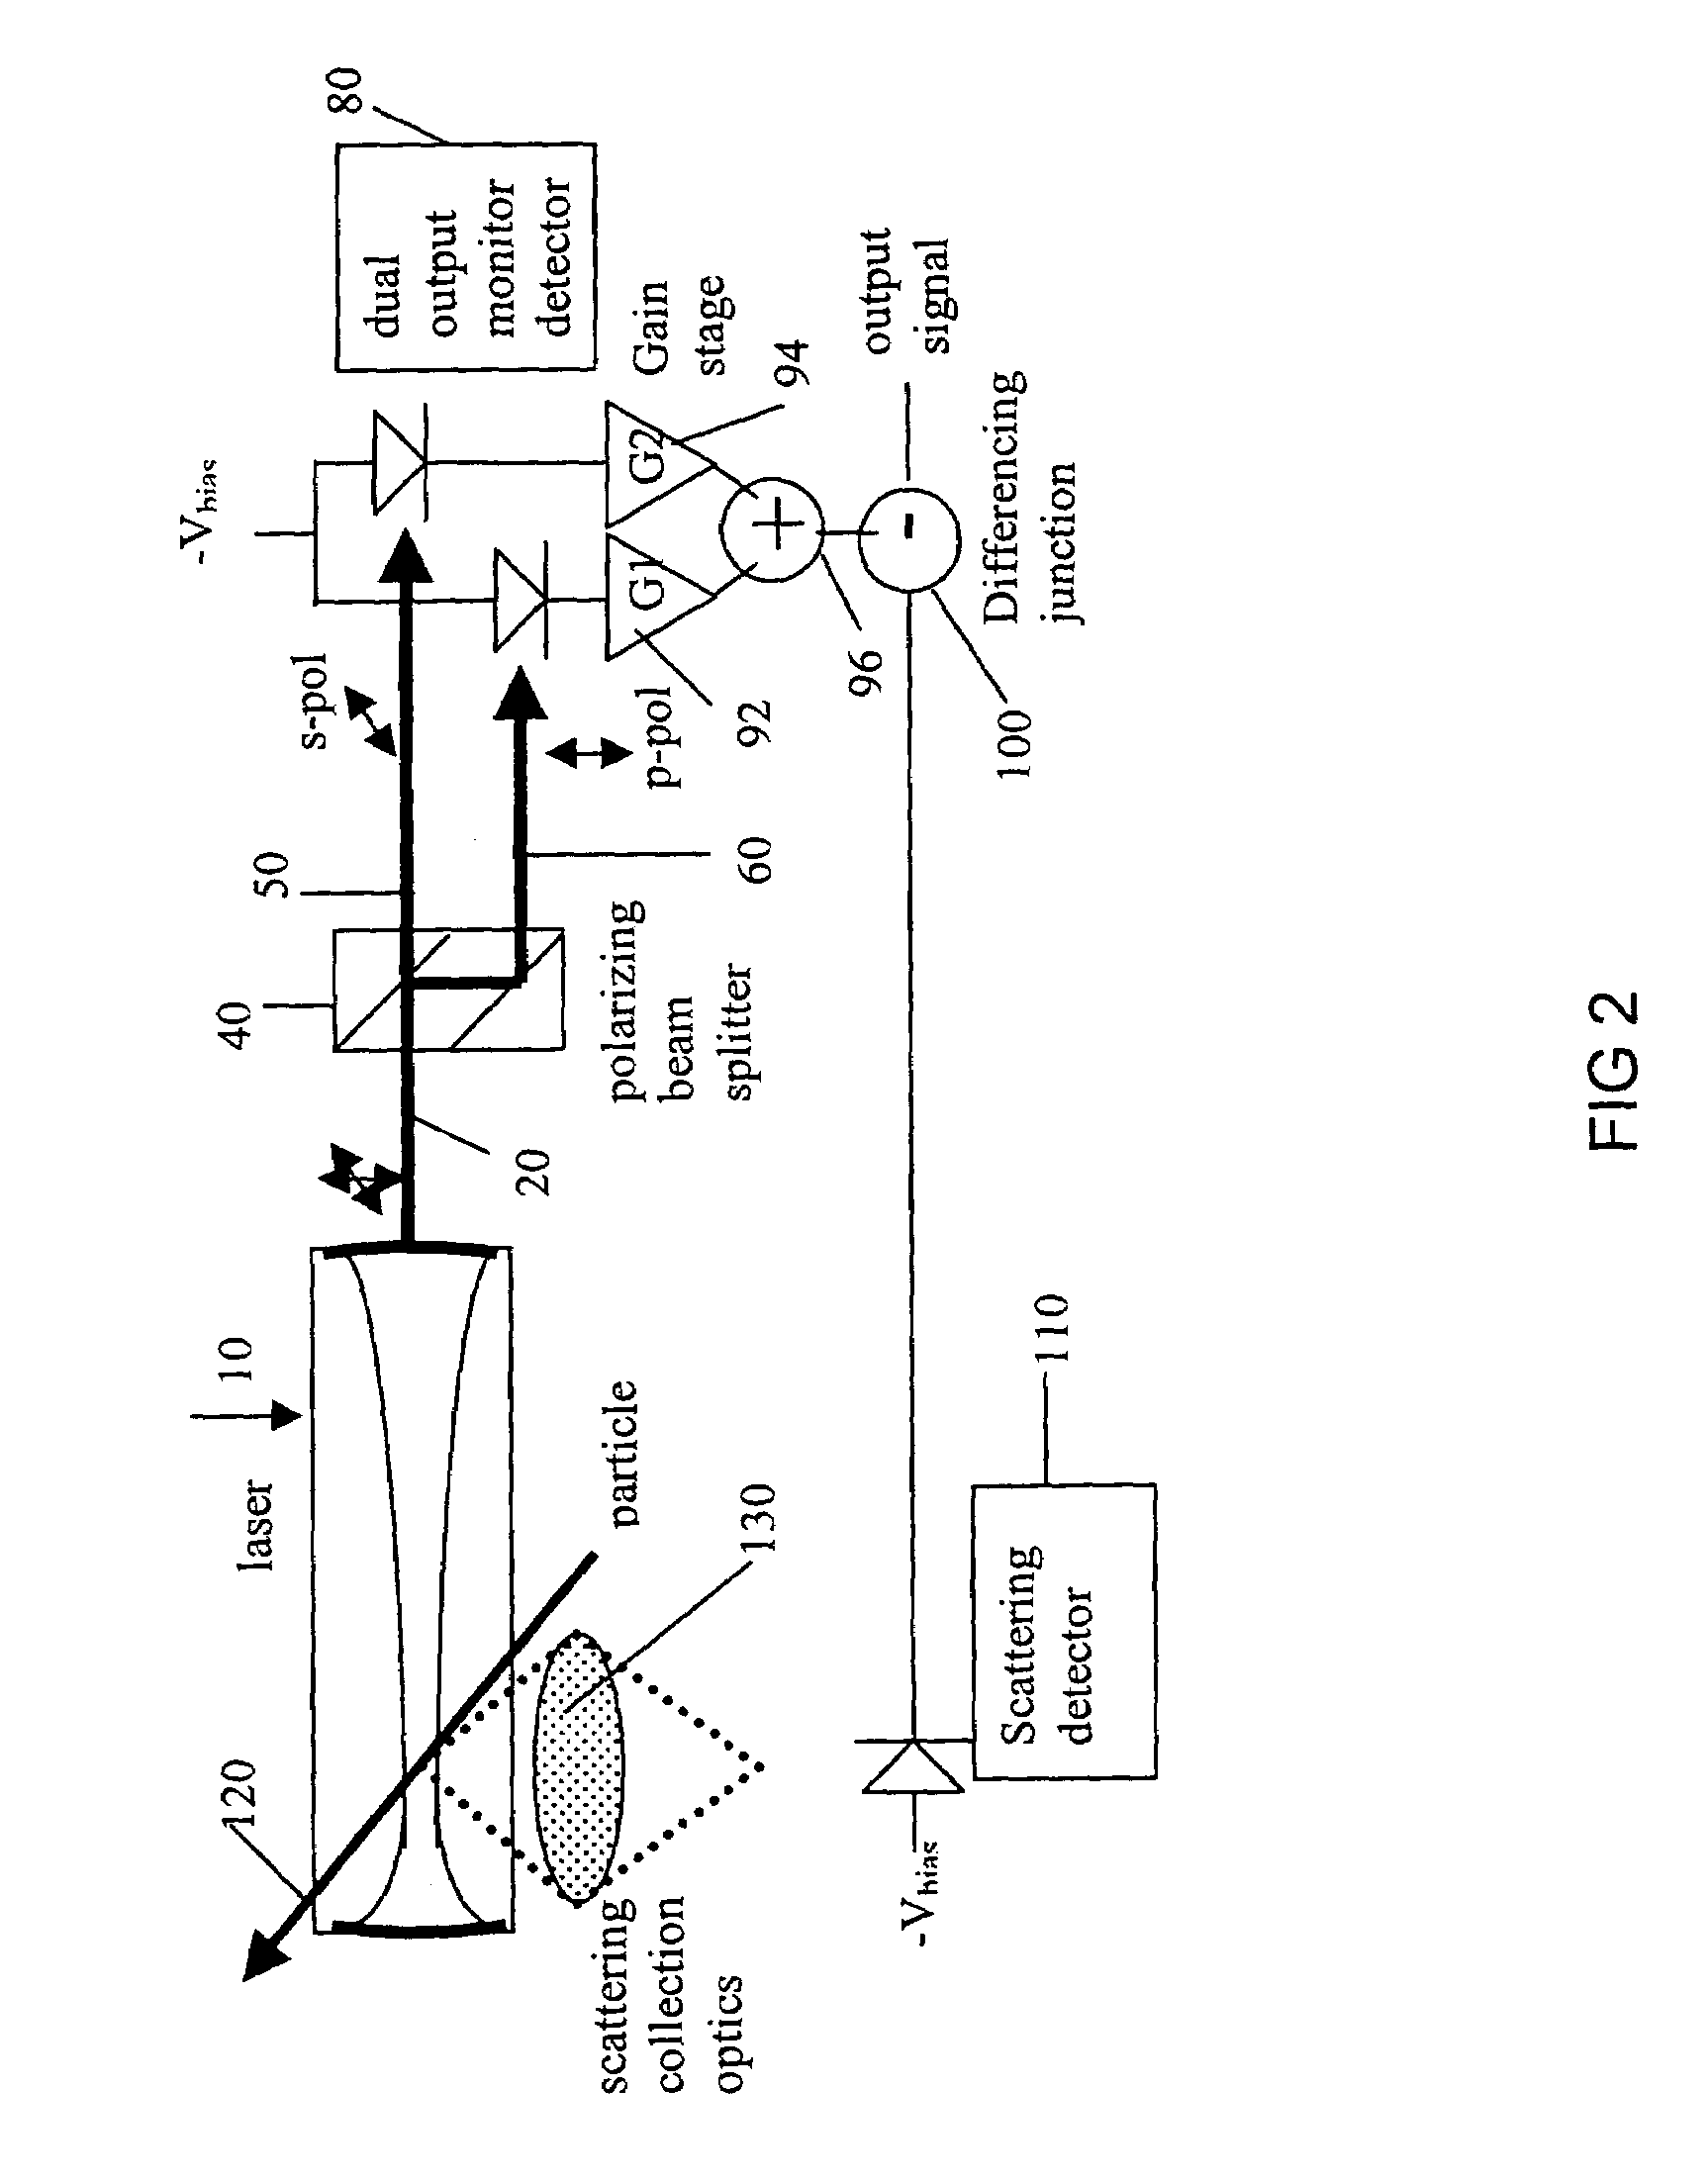 Method of noise cancellation in an unpolarized-laser instrument